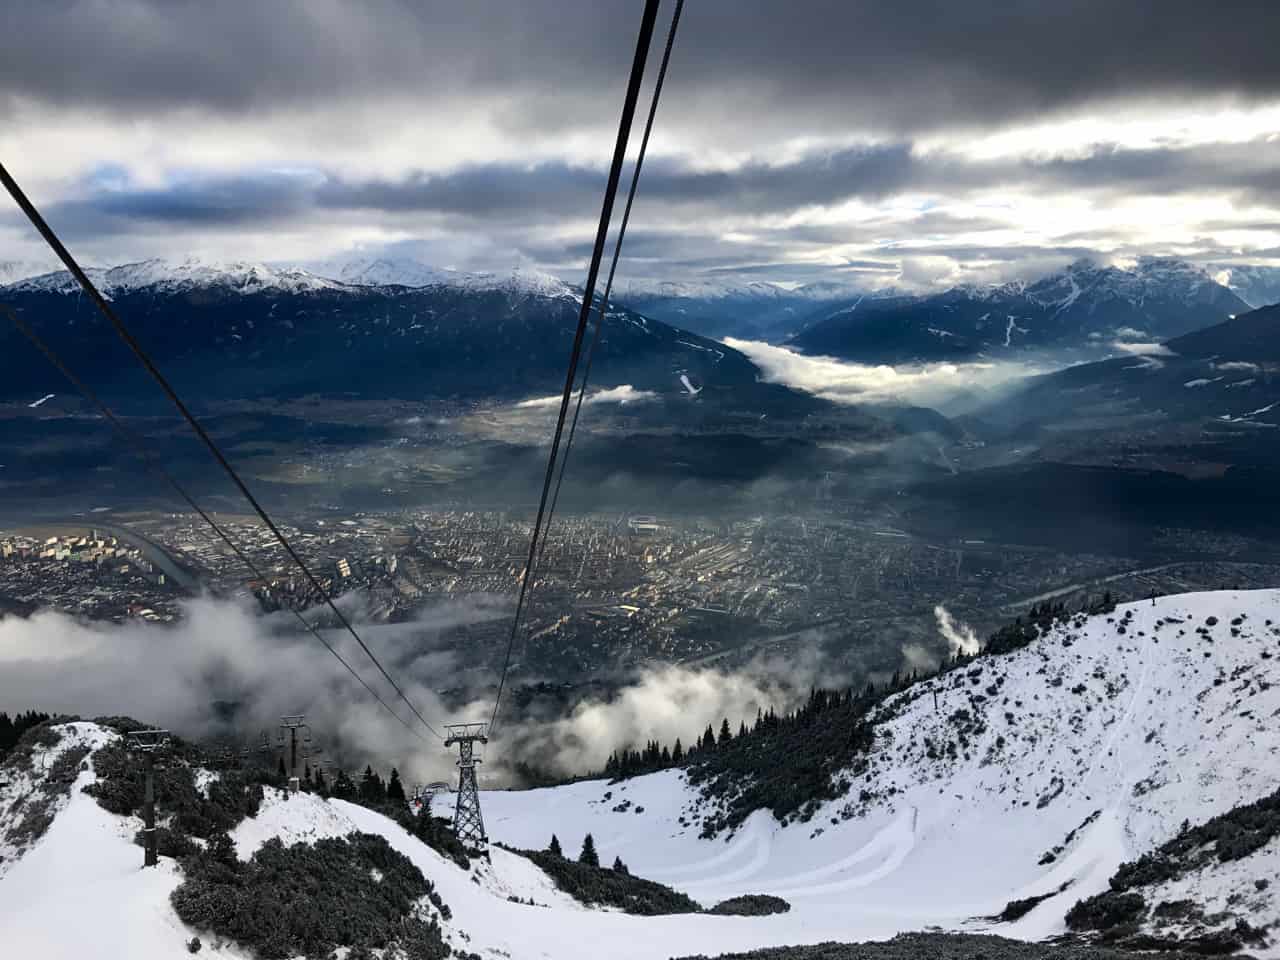 Spectacular views over Innsbruck from the Nordkette mountain.